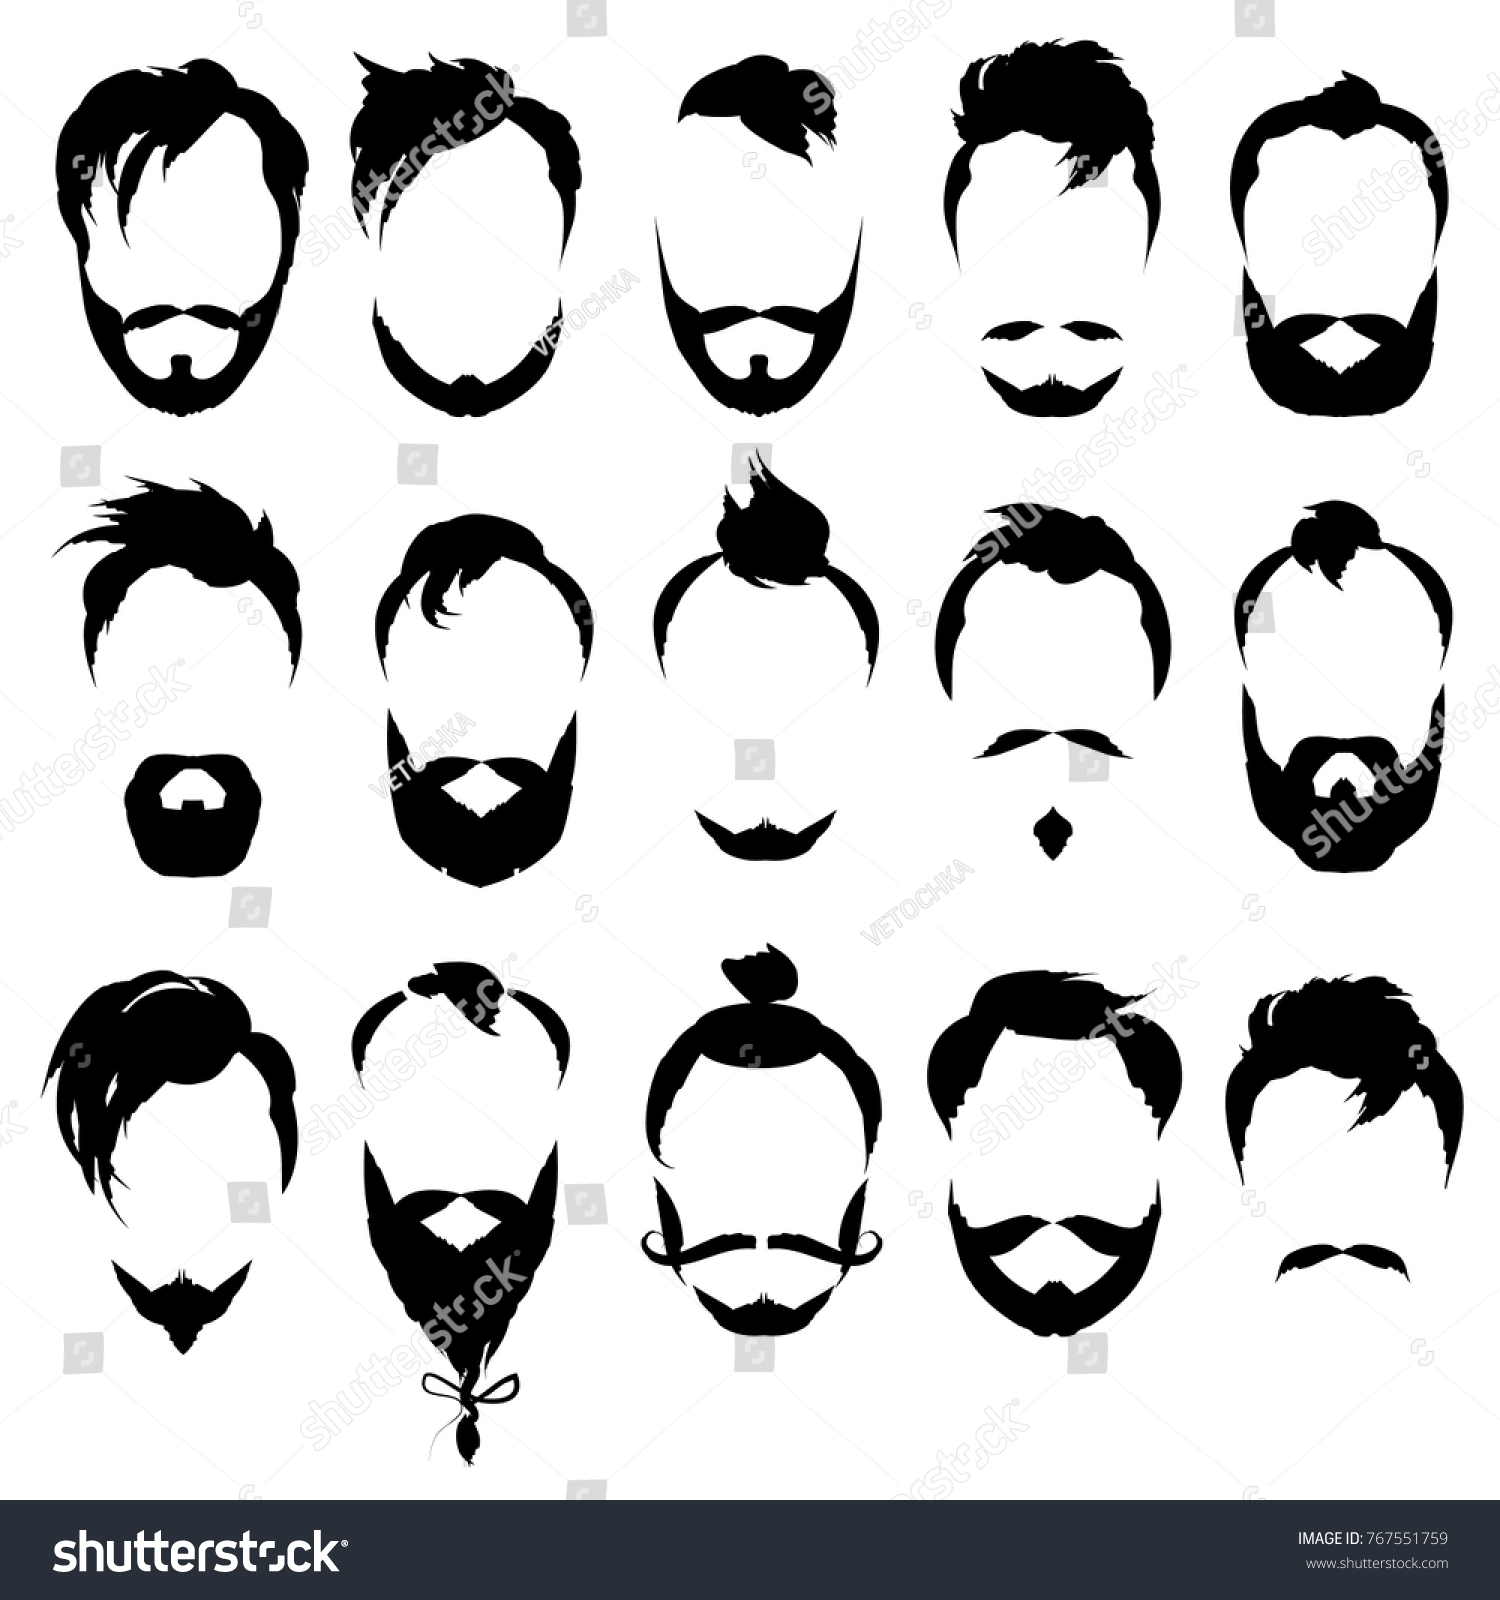 Set Black Silhouette Mens Faces Different Stock Vector Royalty Free 767551759 Shutterstock 4703